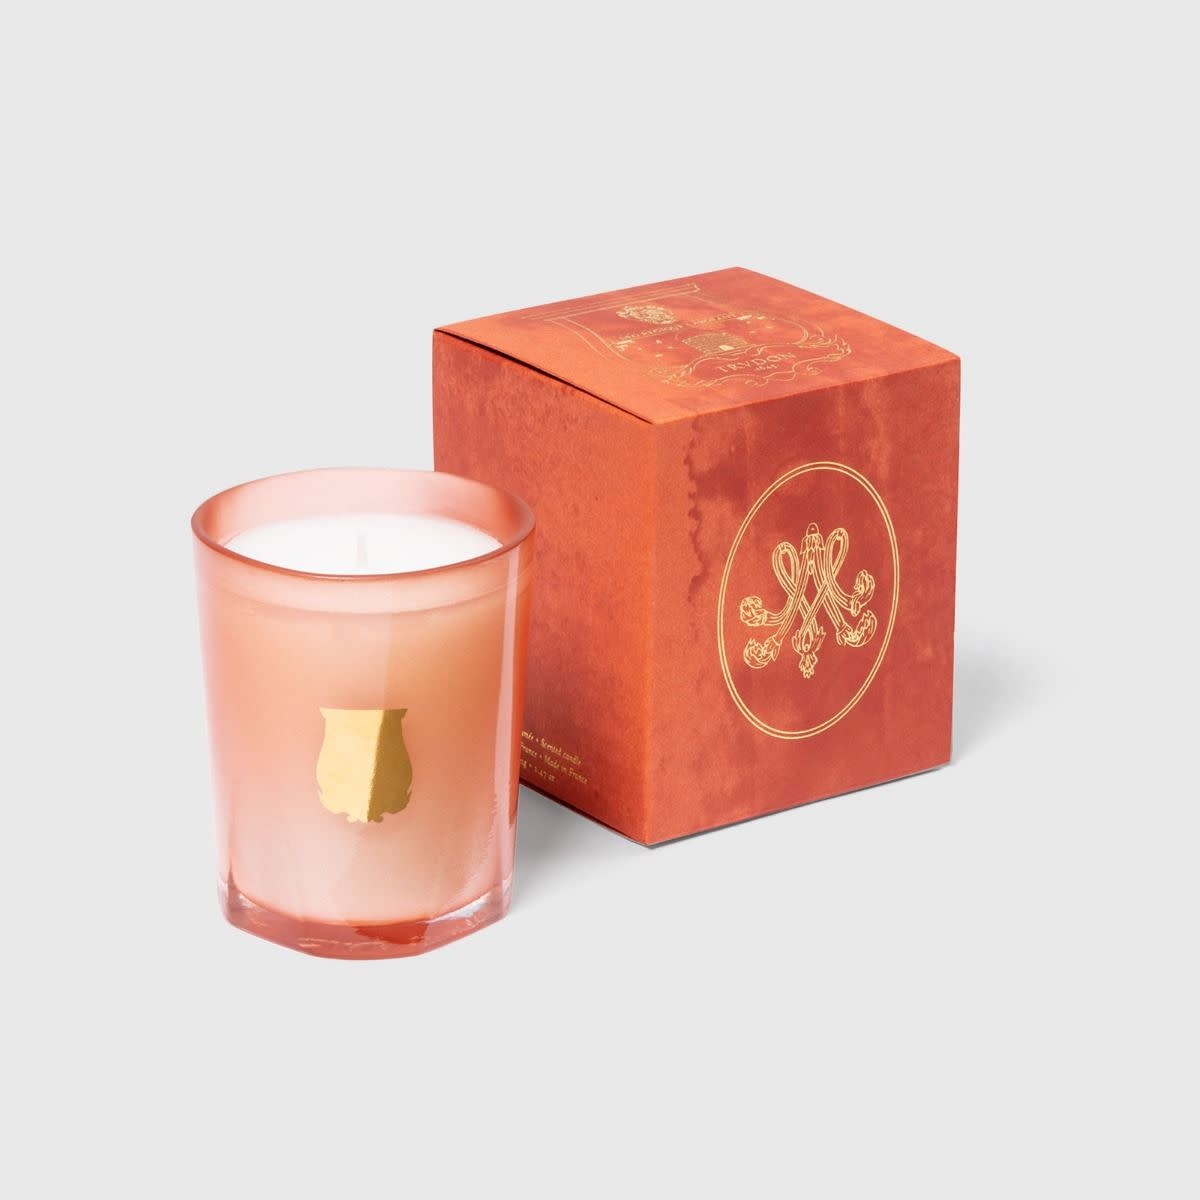 Tuileries - Trudon Petit- 70g - 18-20hrs - Becker Minty